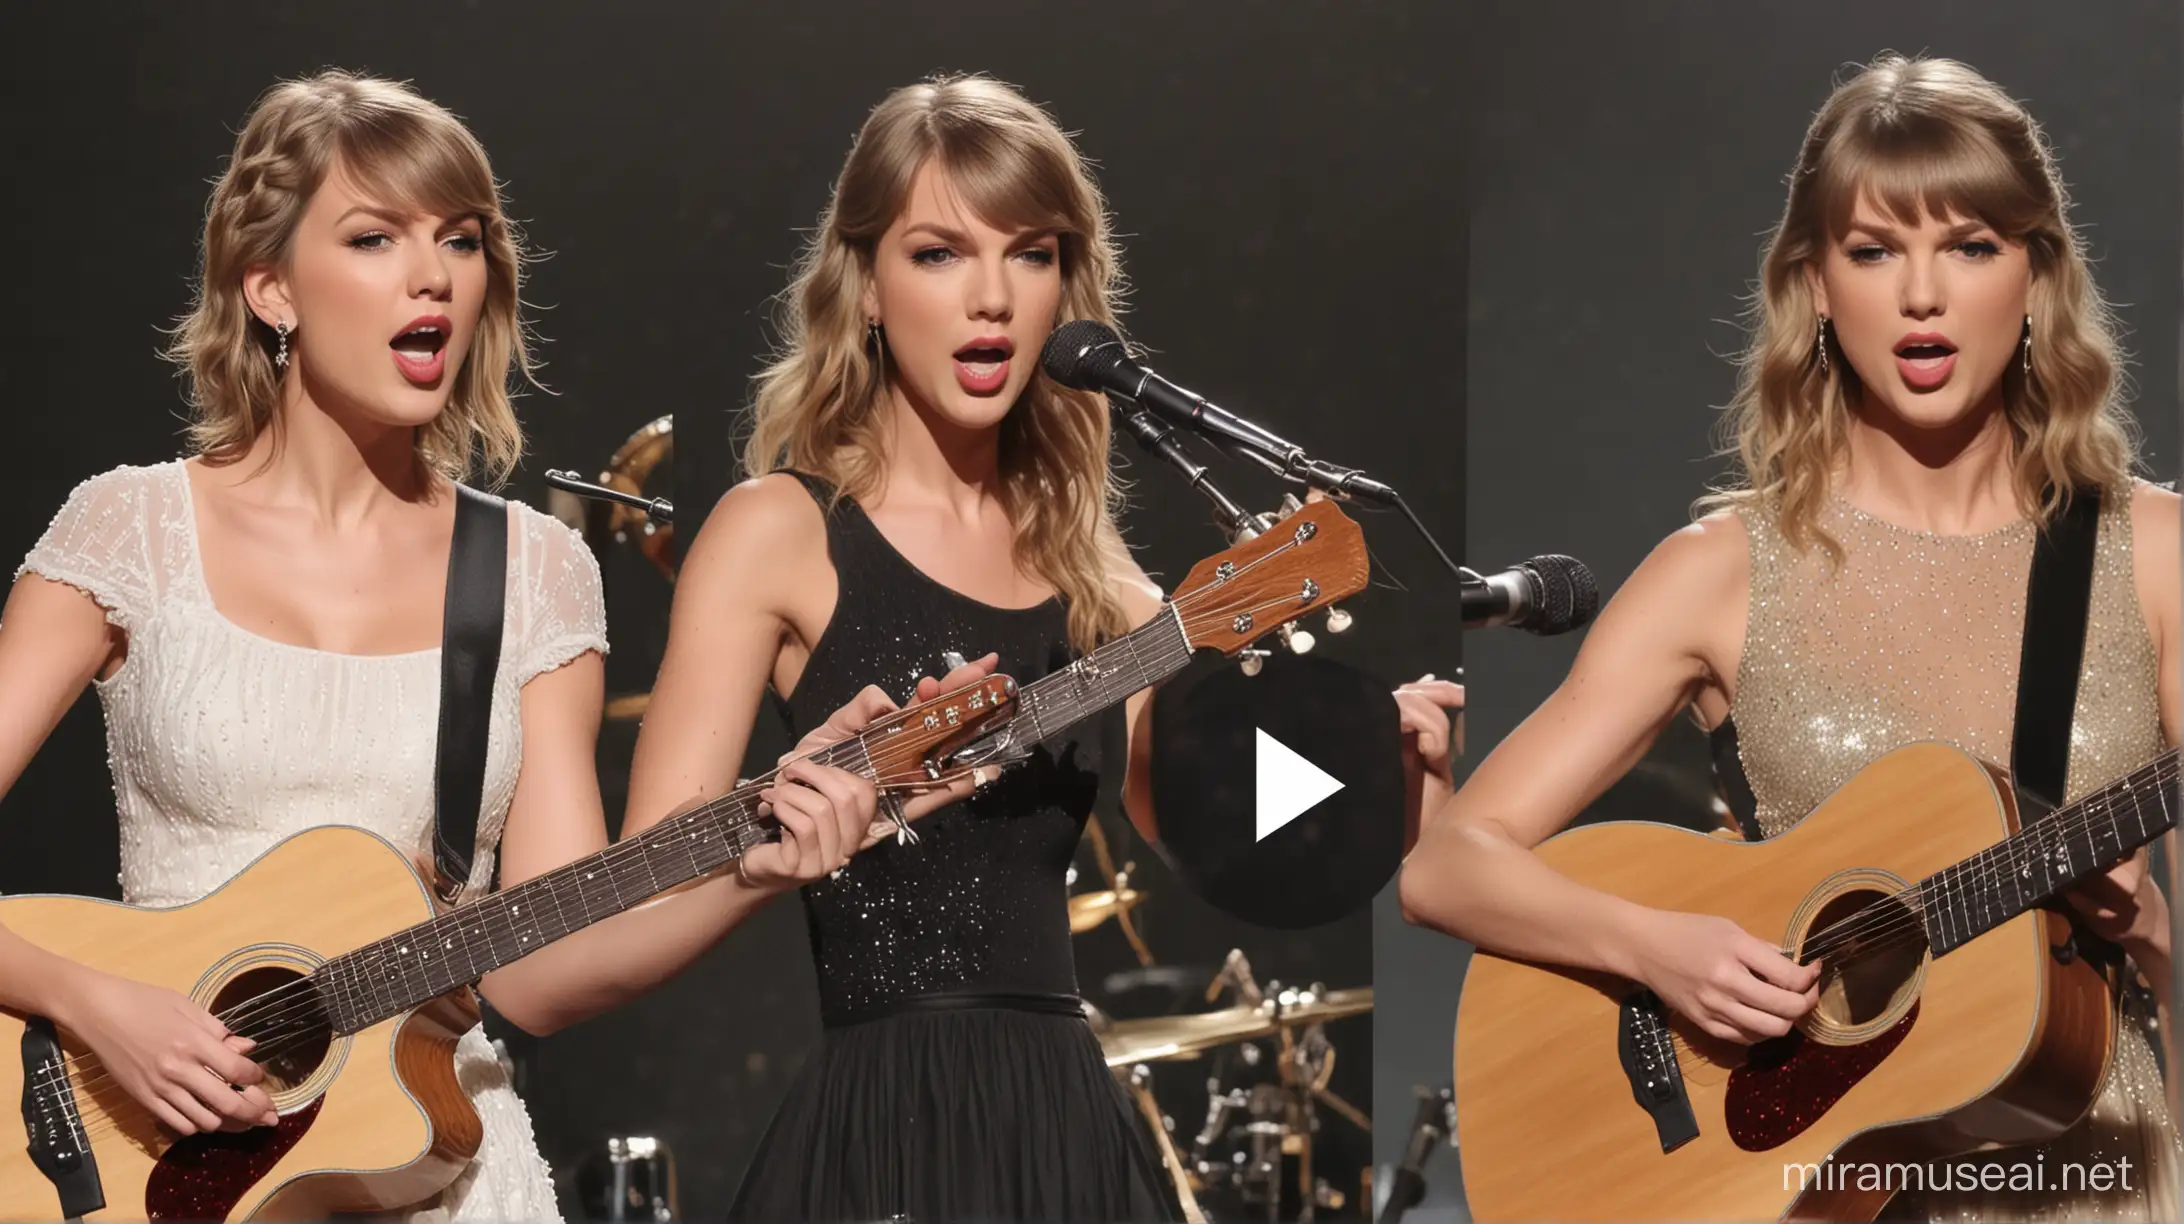 Multitasking Musician Person Playing Multiple Instruments with Taylor Swift Singing